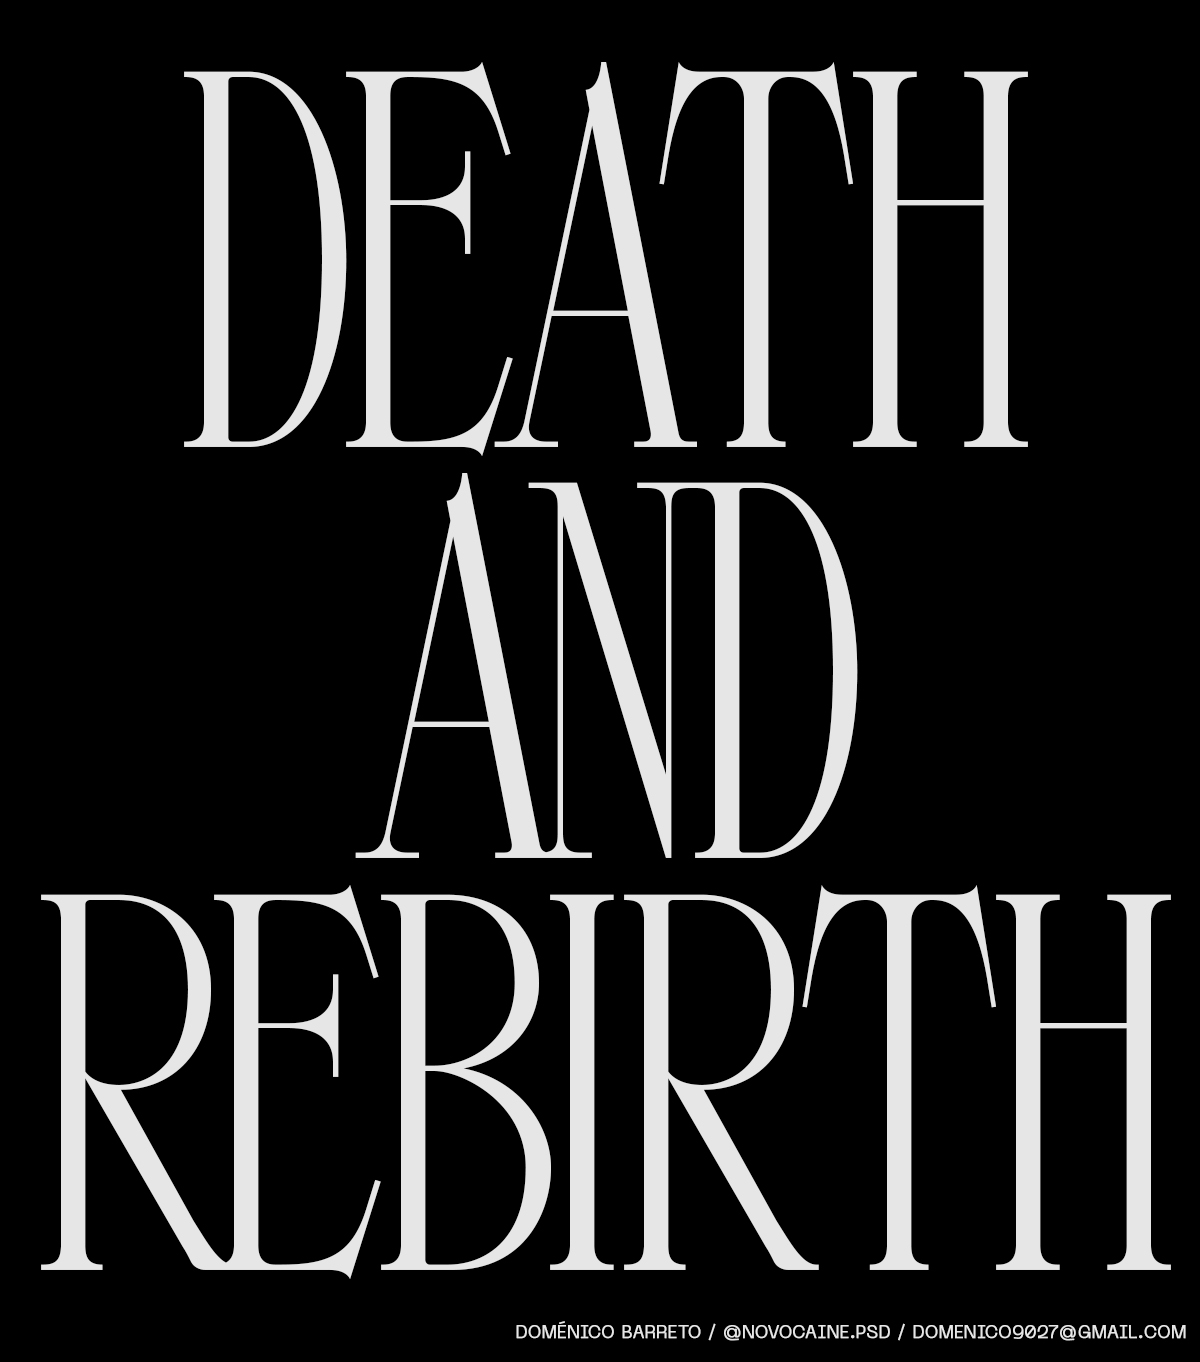 Doménico Barreto Deep Dives Into the Aesthetic of His Latest Typeface, Longinus. 'DEATH AND REBIRTH' set in Longinus, white type on a black background.